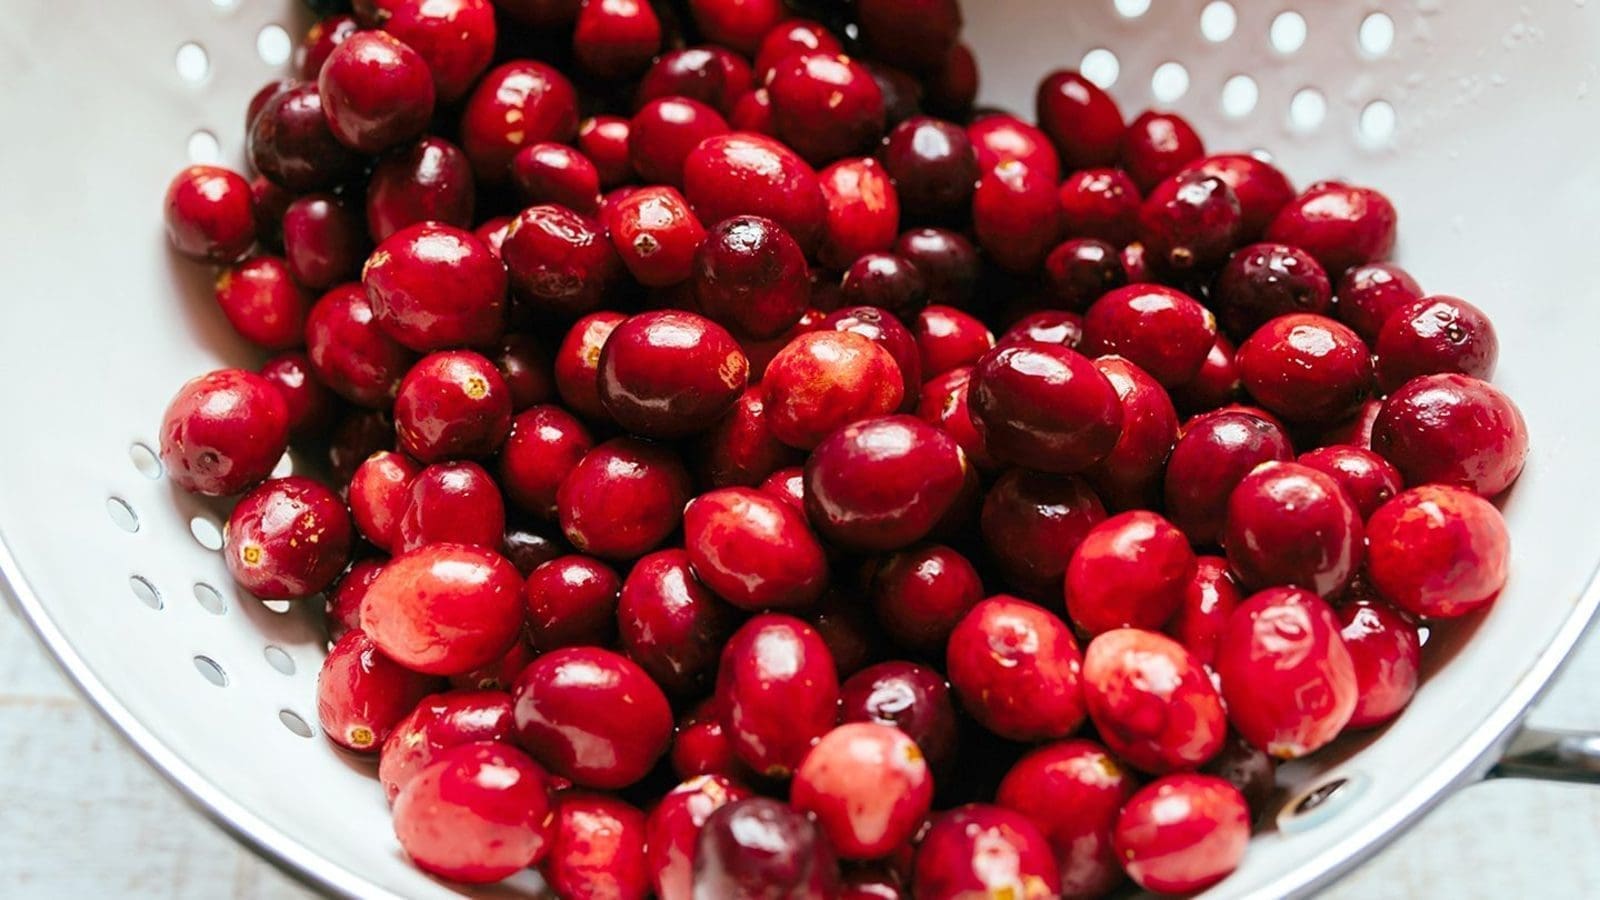 Polyphenol-rich cranberries improves memory and brain function in older adults: new study finds